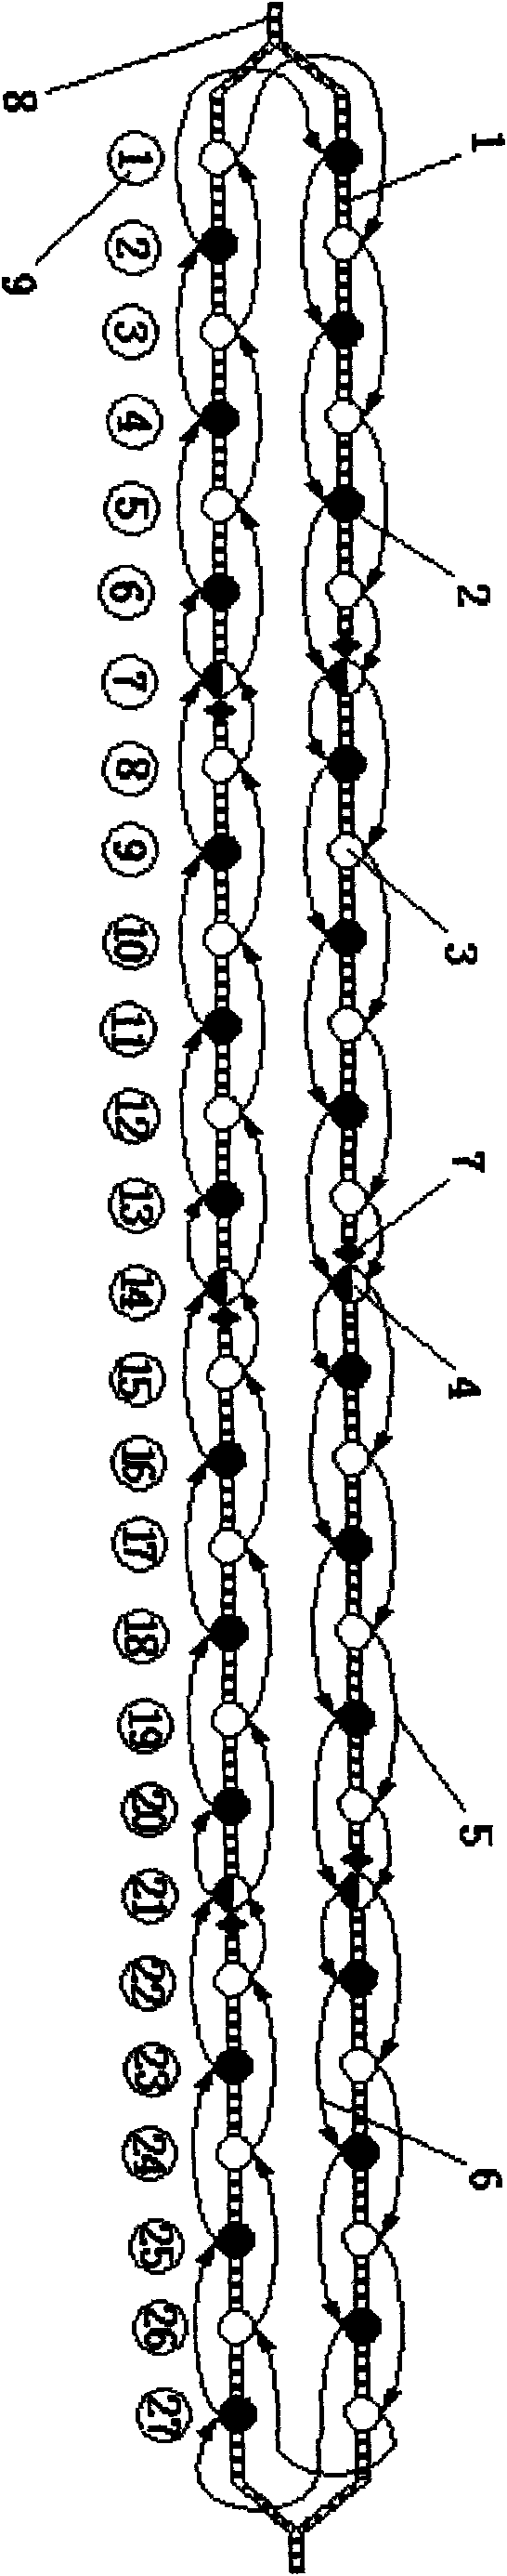 Rail transit system with sectionalized operation mode